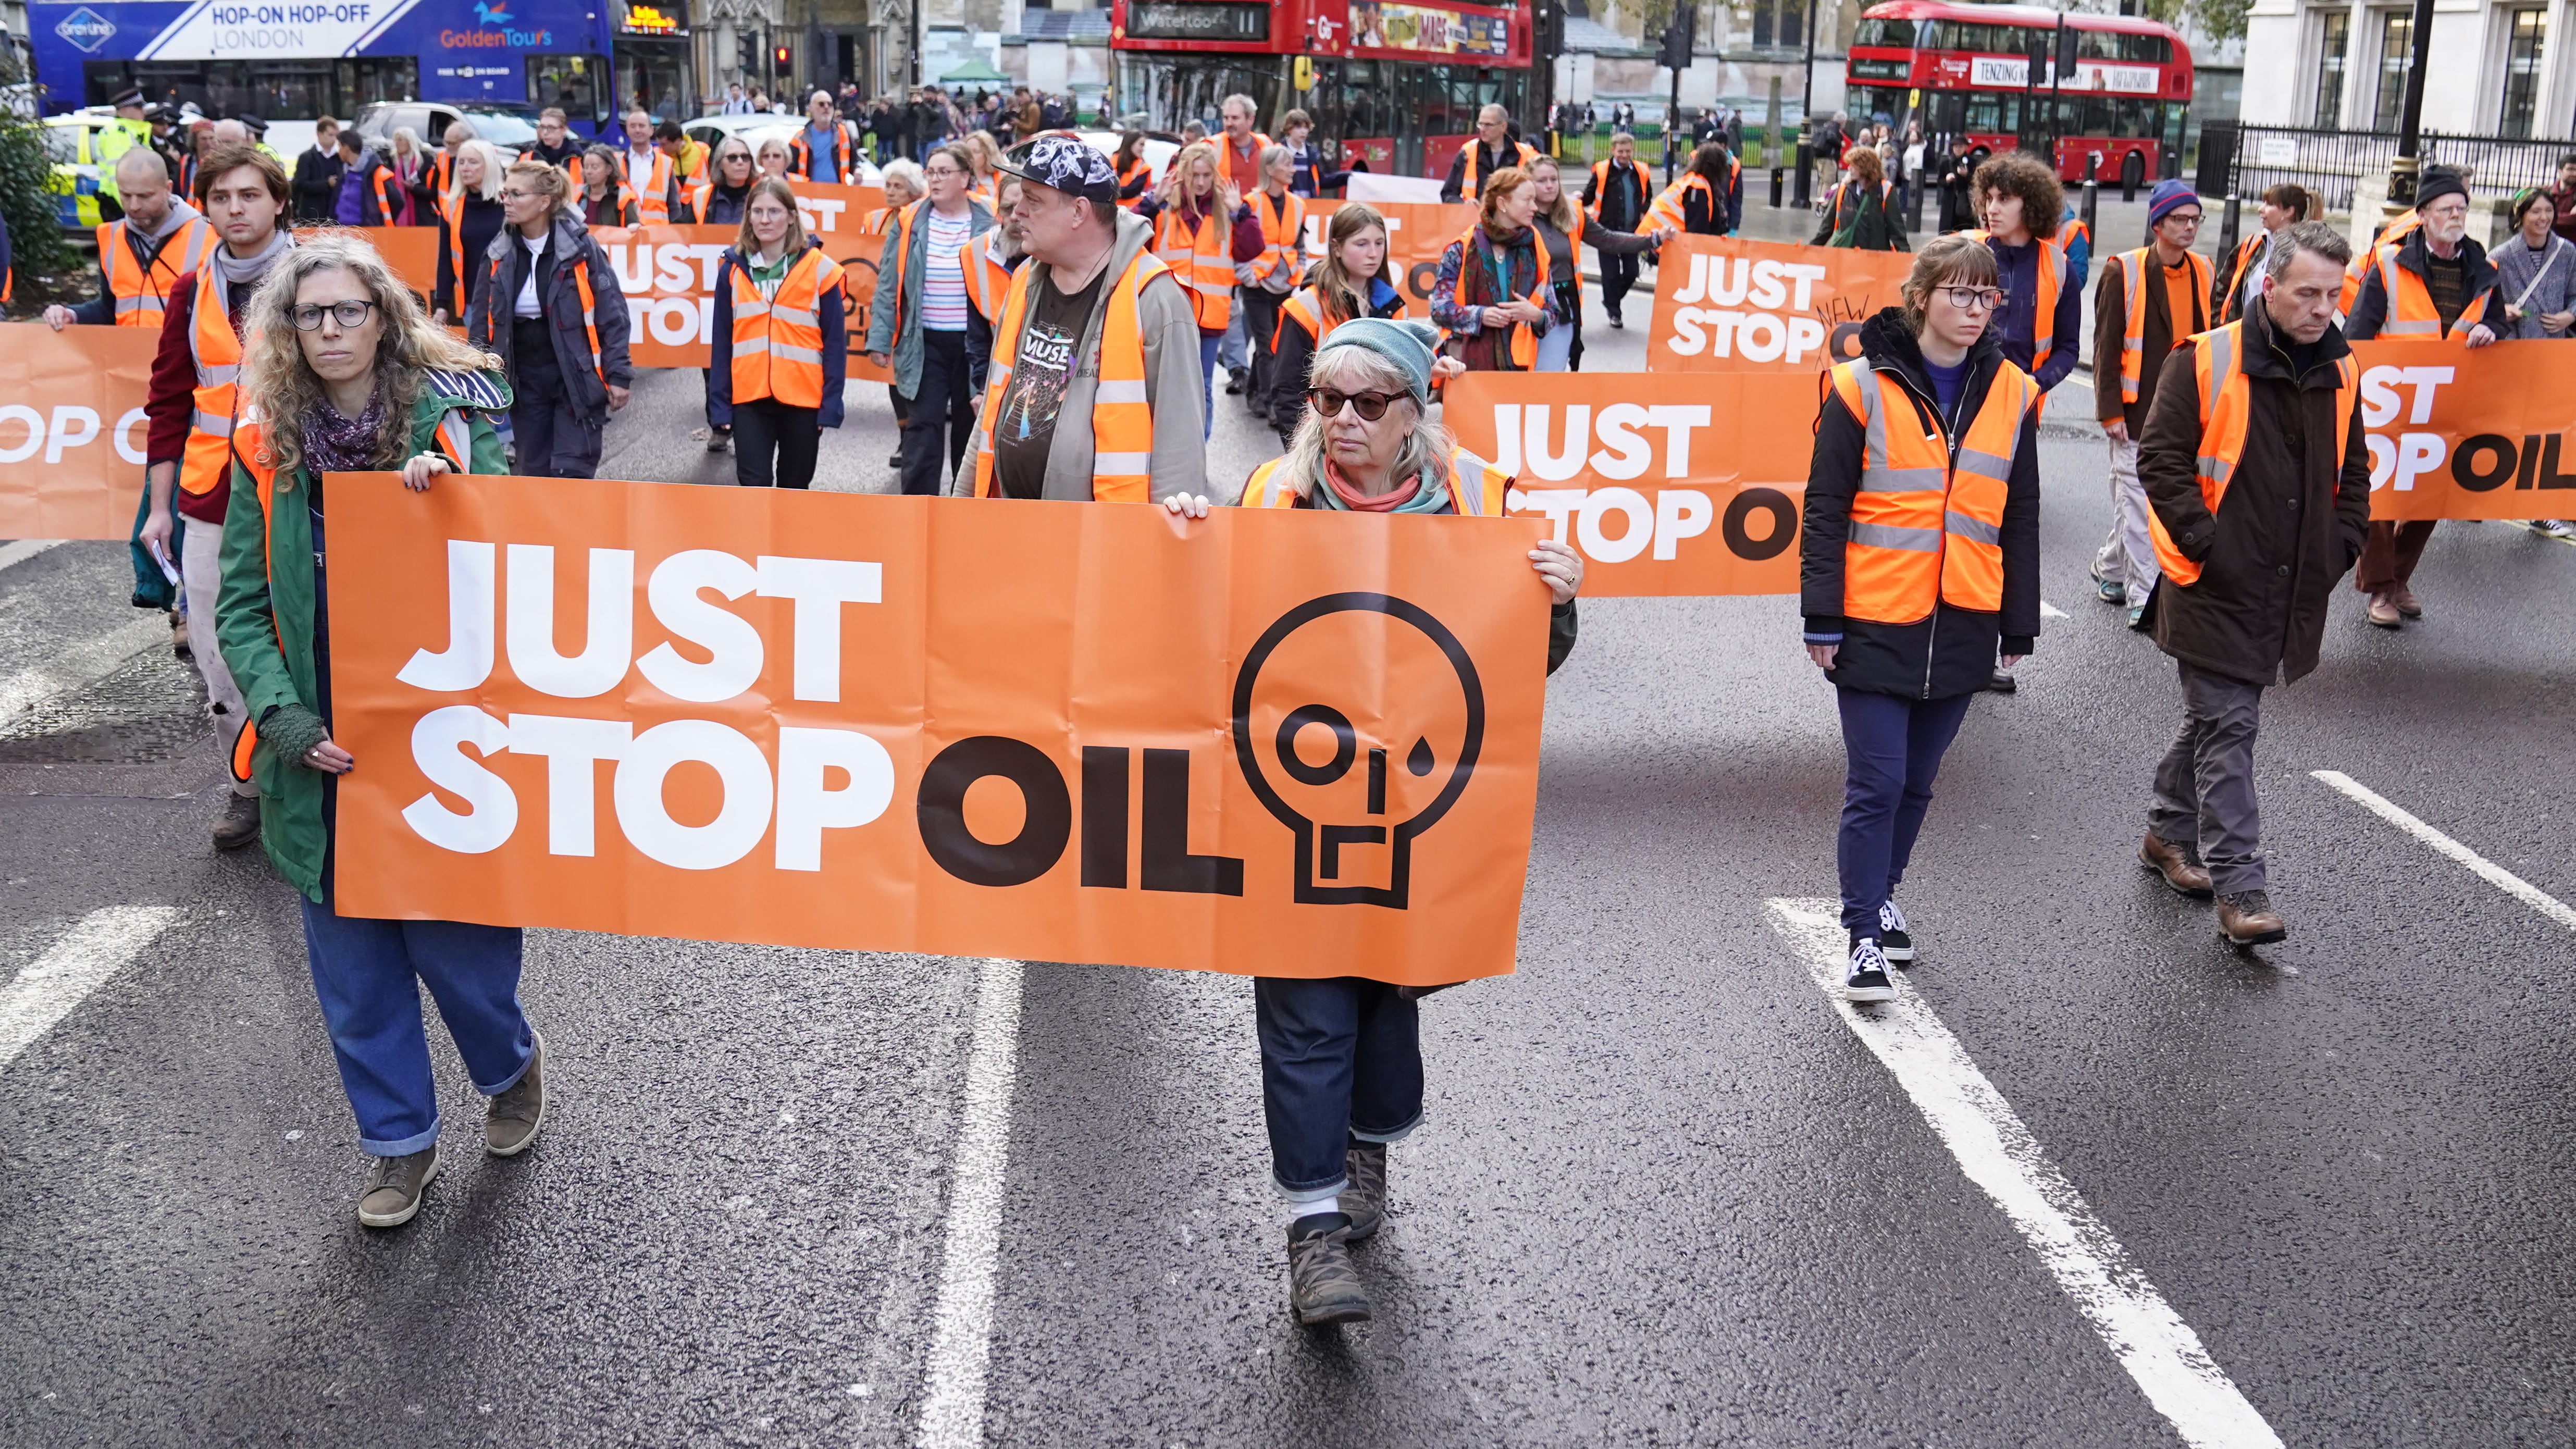 The Metropolitan Police has arrested 27 people suspected of planning to disrupt airports as part of Just Stop Oil protests